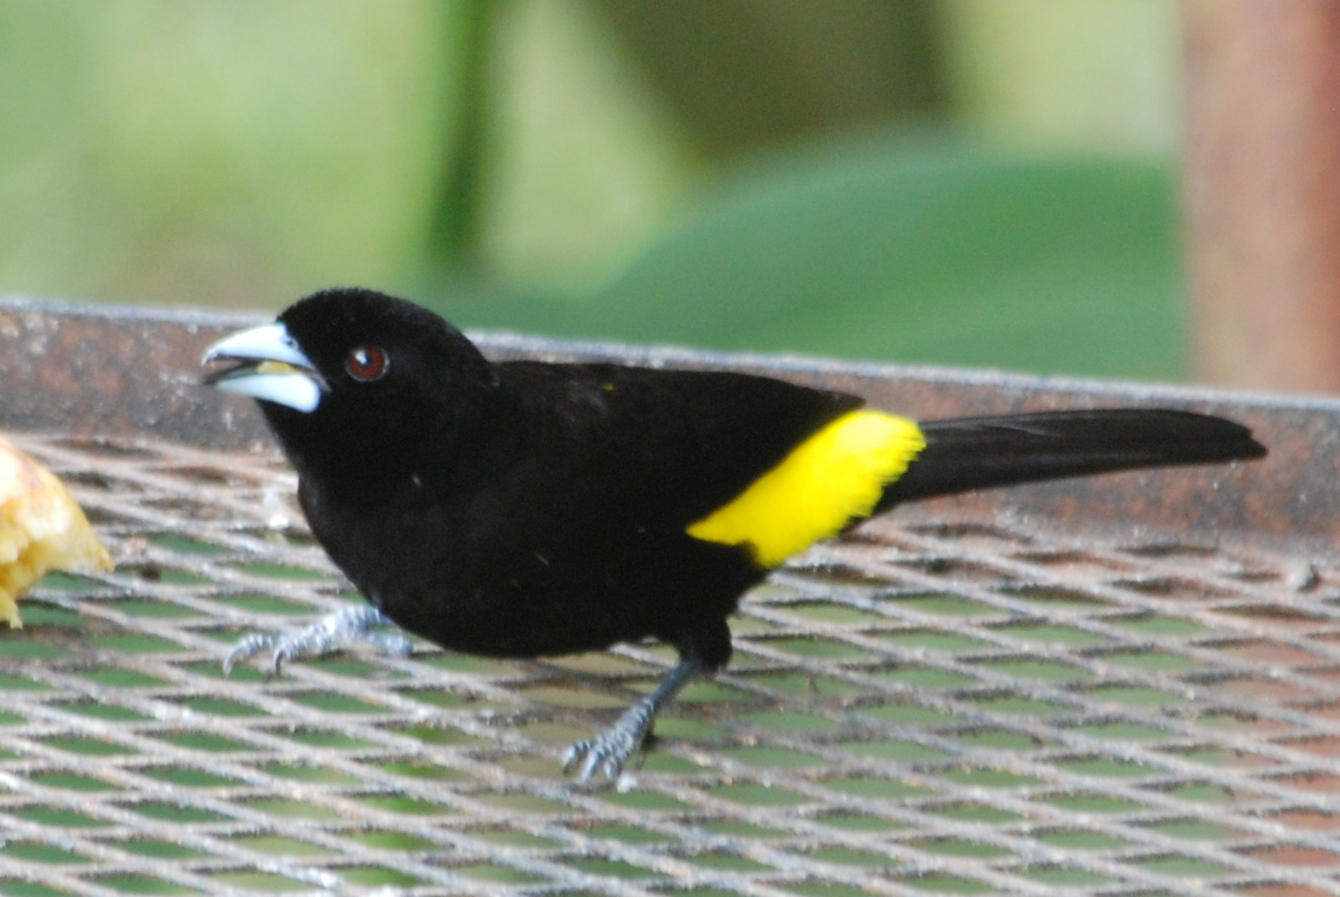 Click picture to see more Flame-rumped Tanagers.